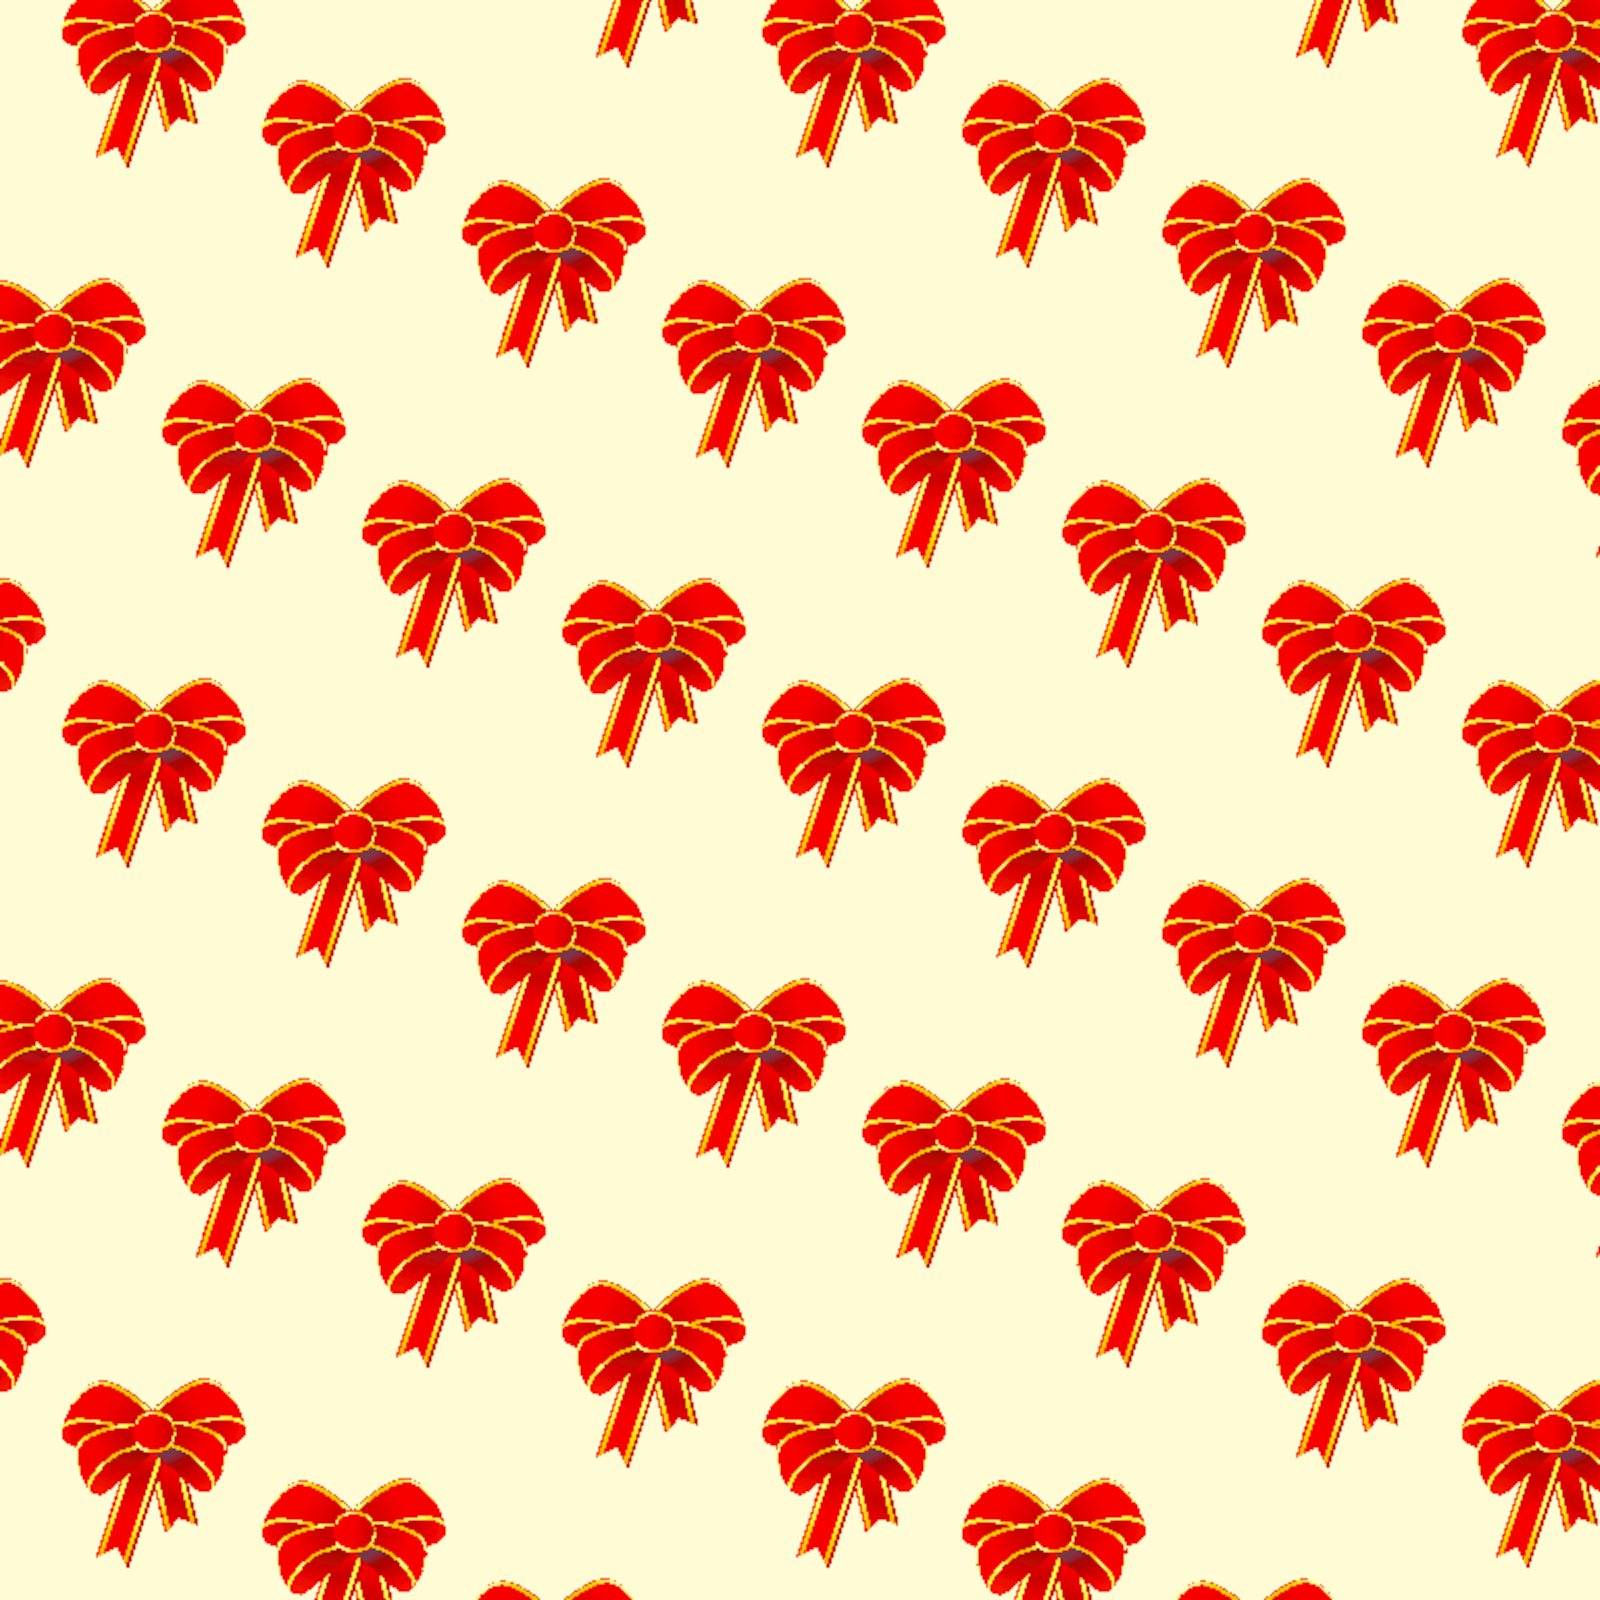 Seamless holiday background with red bows